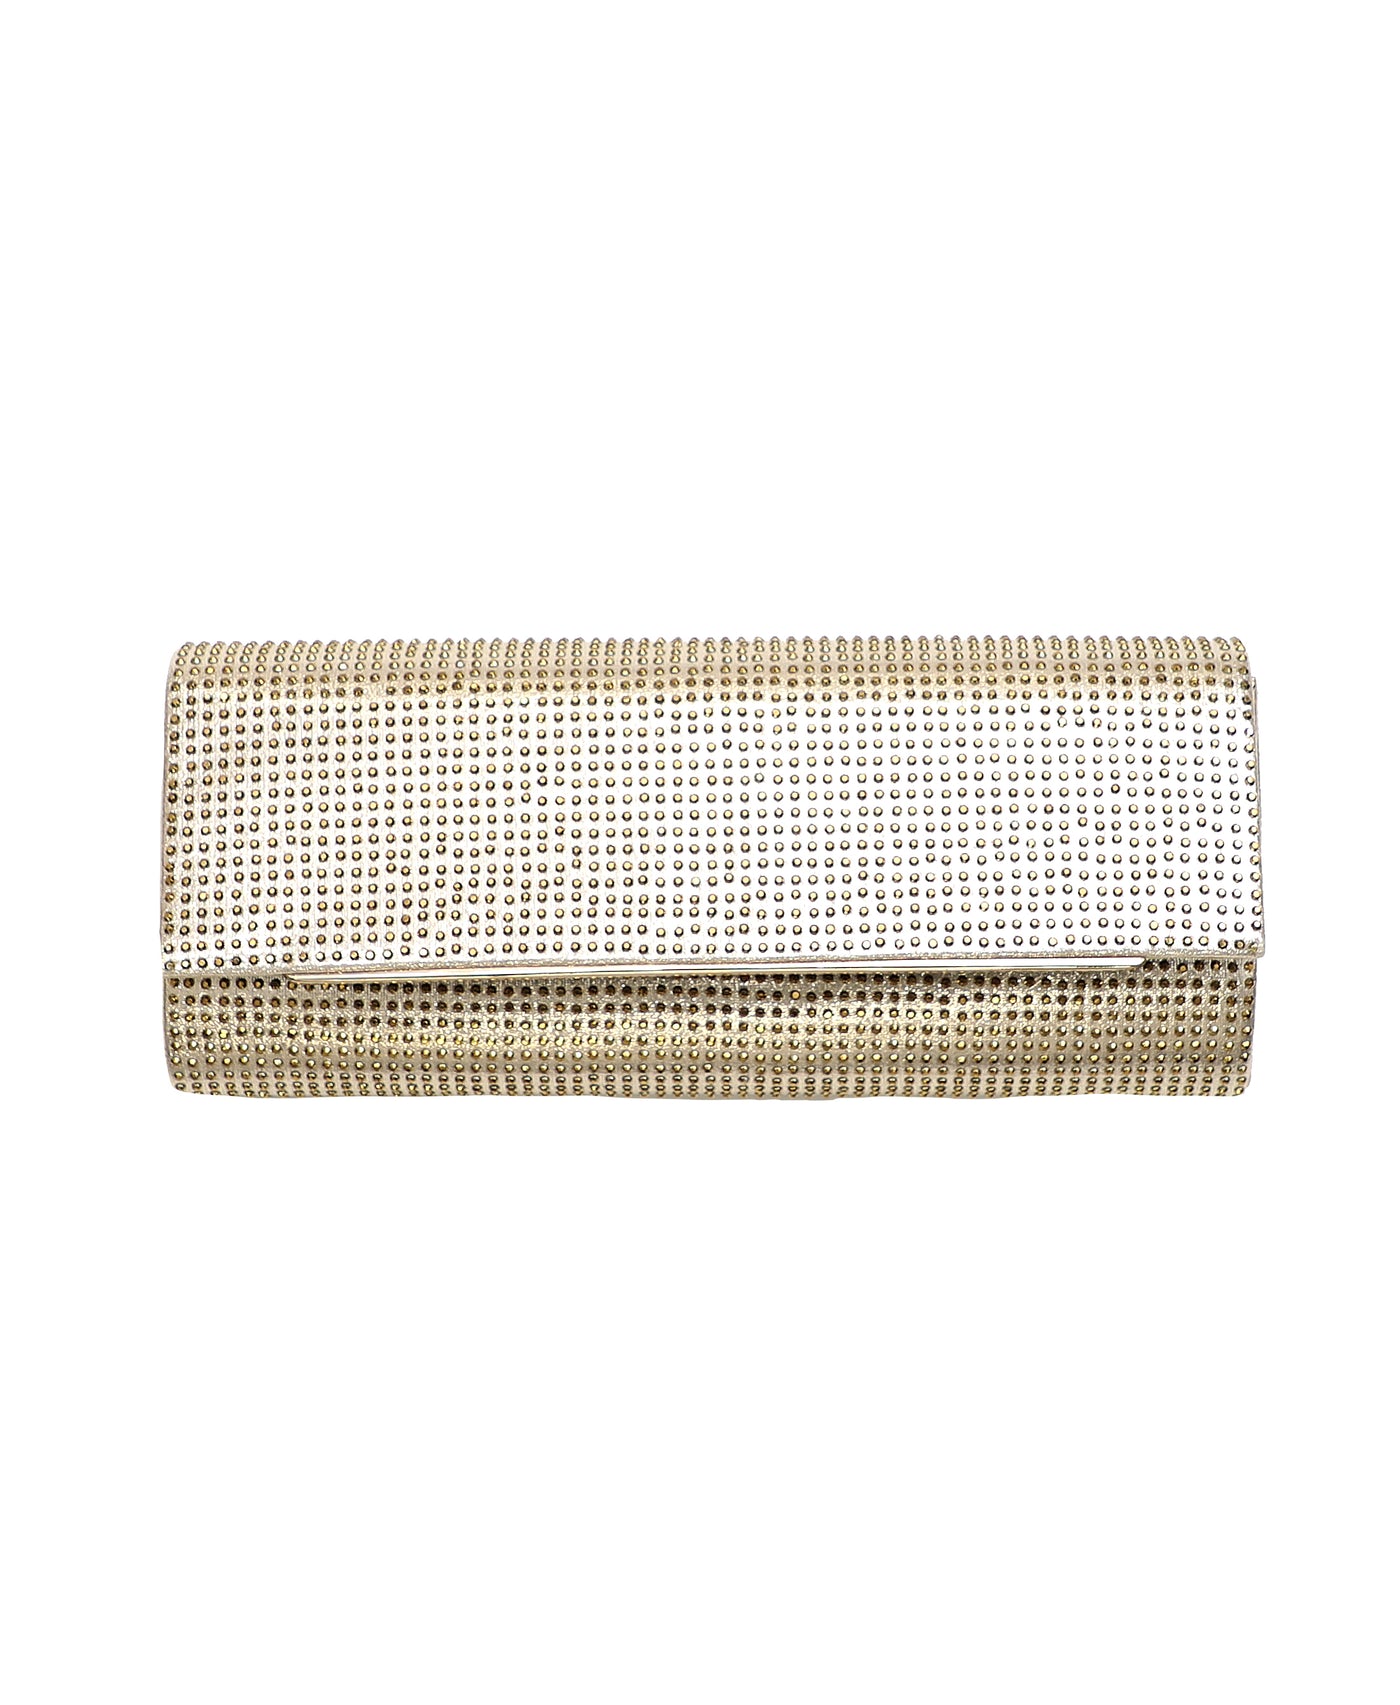 Evening Clutch w/ Crystals image 1